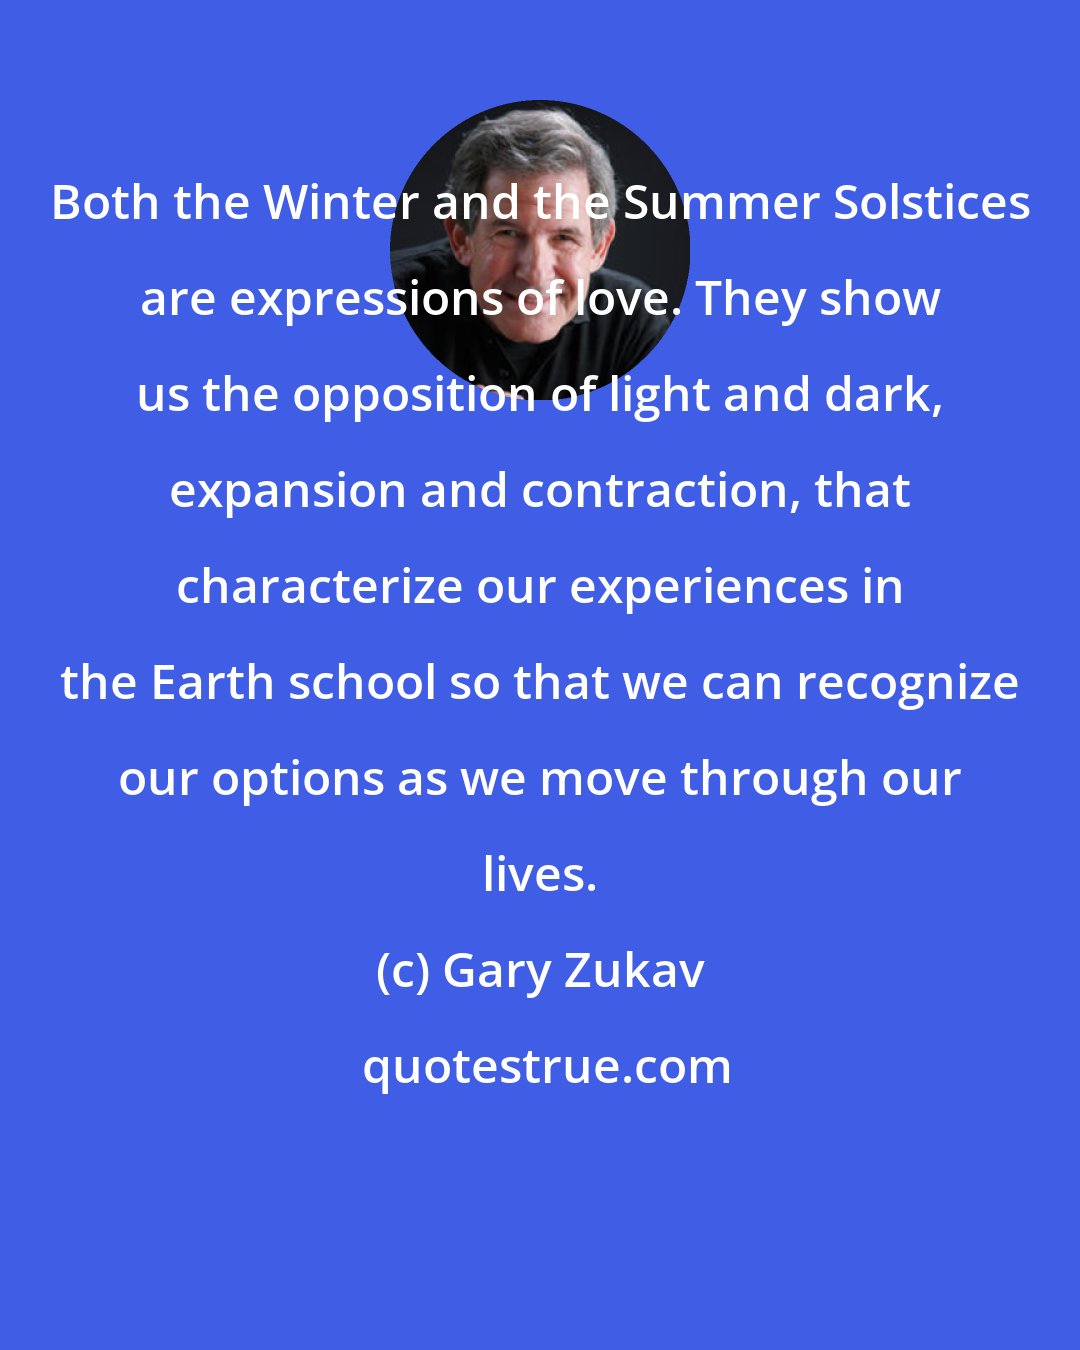 Gary Zukav: Both the Winter and the Summer Solstices are expressions of love. They show us the opposition of light and dark, expansion and contraction, that characterize our experiences in the Earth school so that we can recognize our options as we move through our lives.